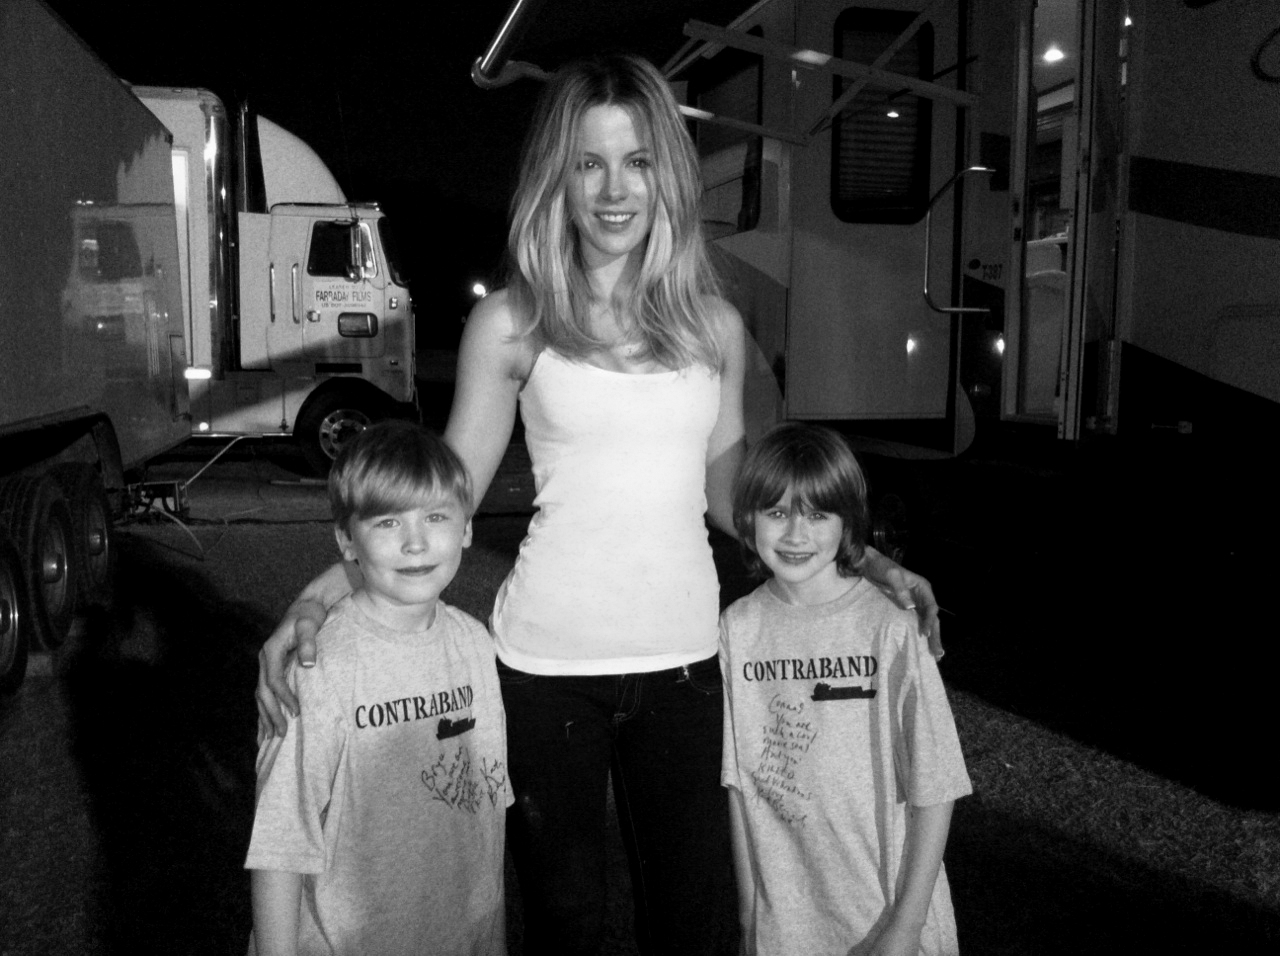 Connor Hill, Kate Beckinsale & Bryce McDaniels filming Contraband